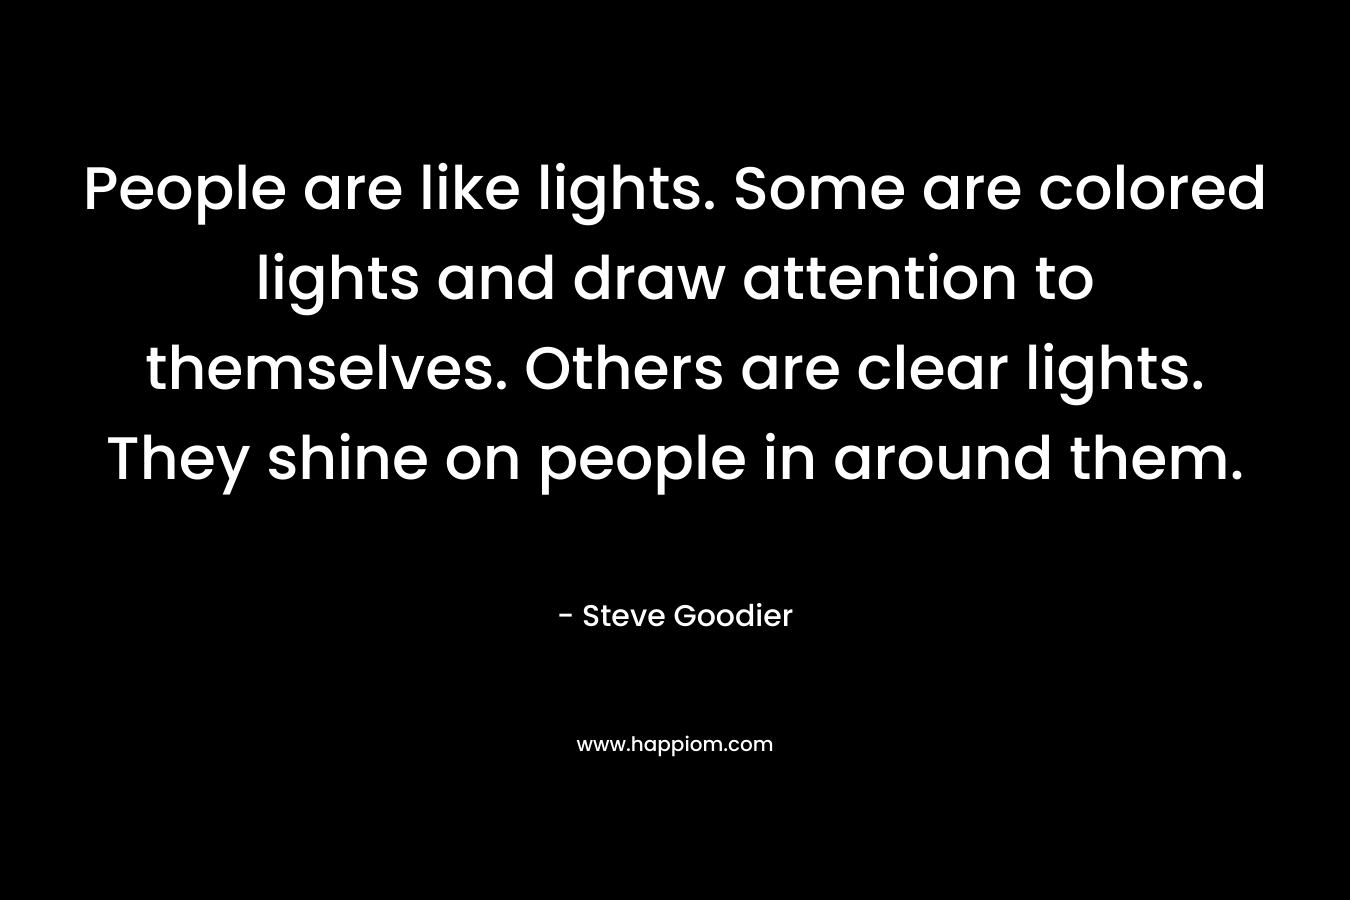 People are like lights. Some are colored lights and draw attention to themselves. Others are clear lights. They shine on people in around them.